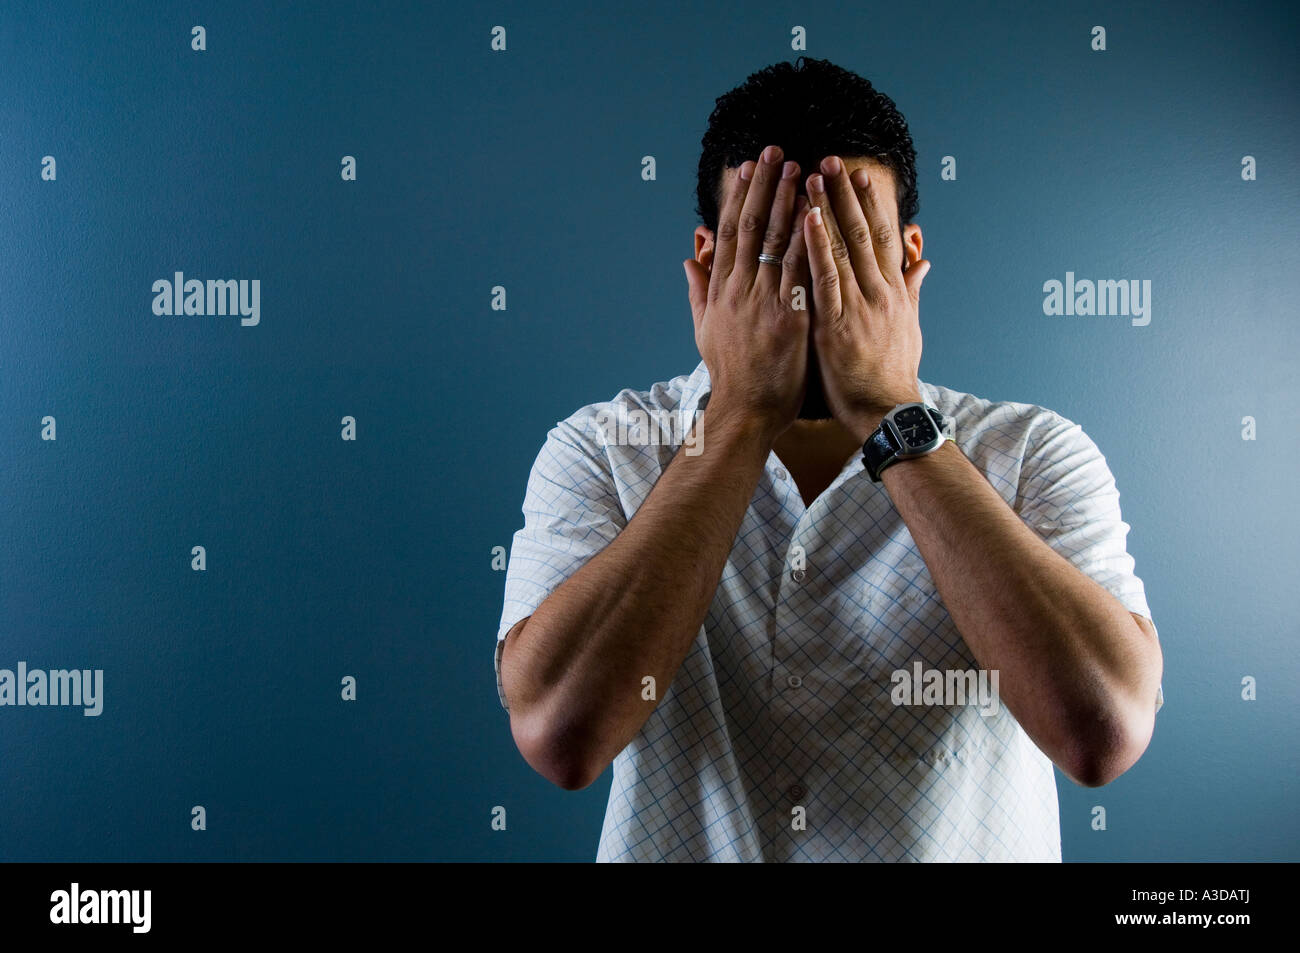 Contemporary image of a man hiding his face indoors Stock Photo